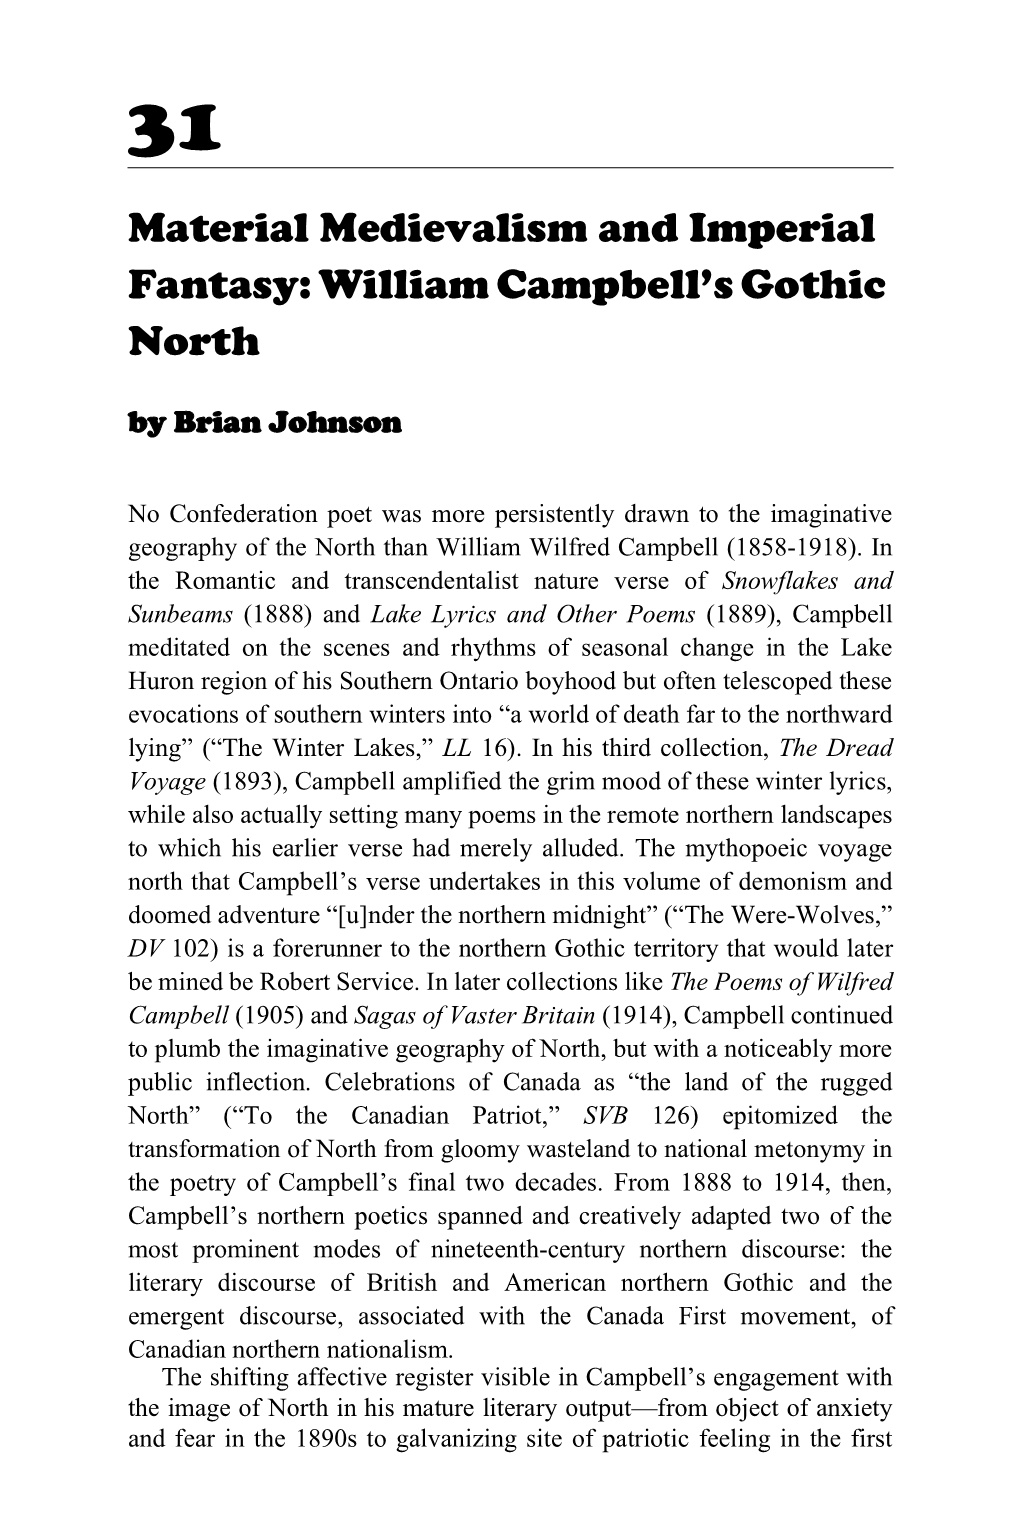 Material Medievalism and Imperial Fantasy: William Wilfred Campbell's Gothic North